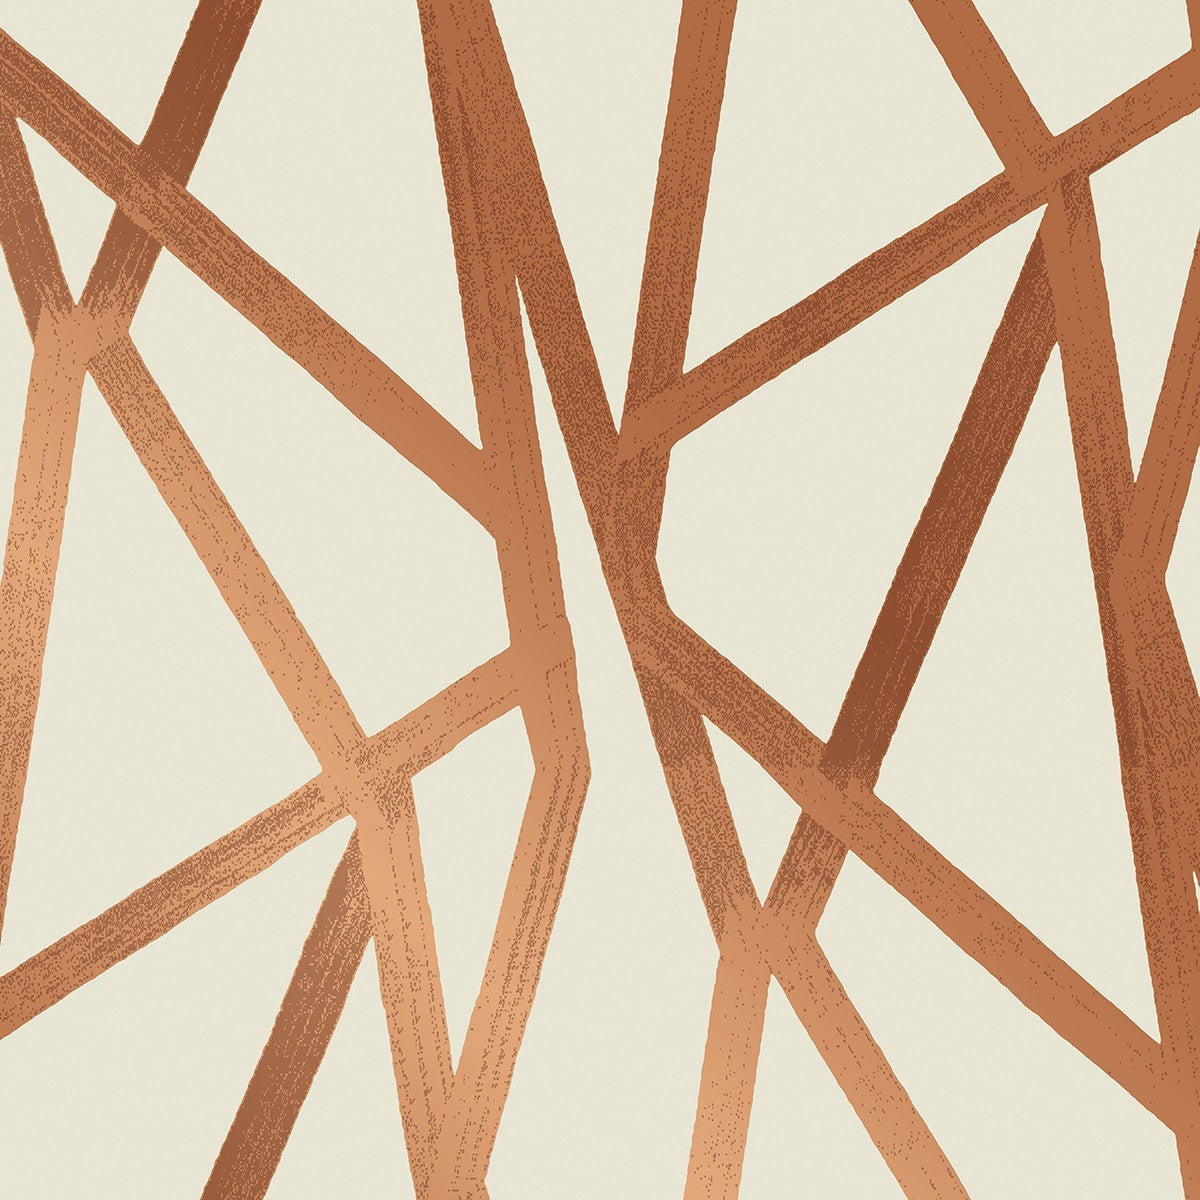 Intersections Urban Bronze Self-Adhesive IN412 Wallpaper